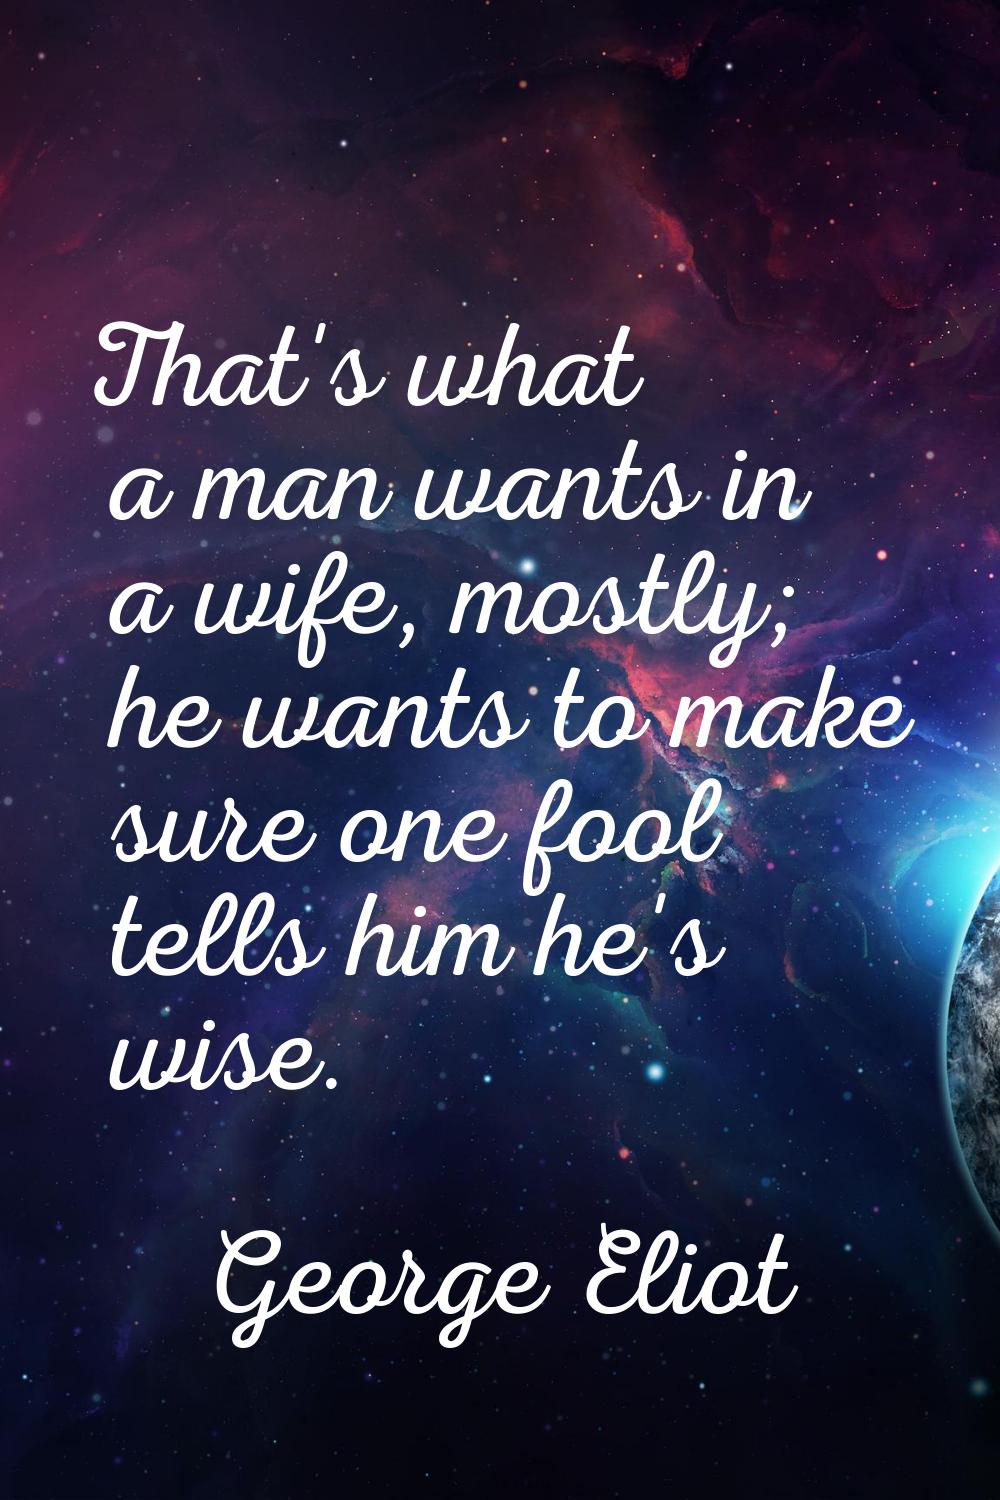 That's what a man wants in a wife, mostly; he wants to make sure one fool tells him he's wise.